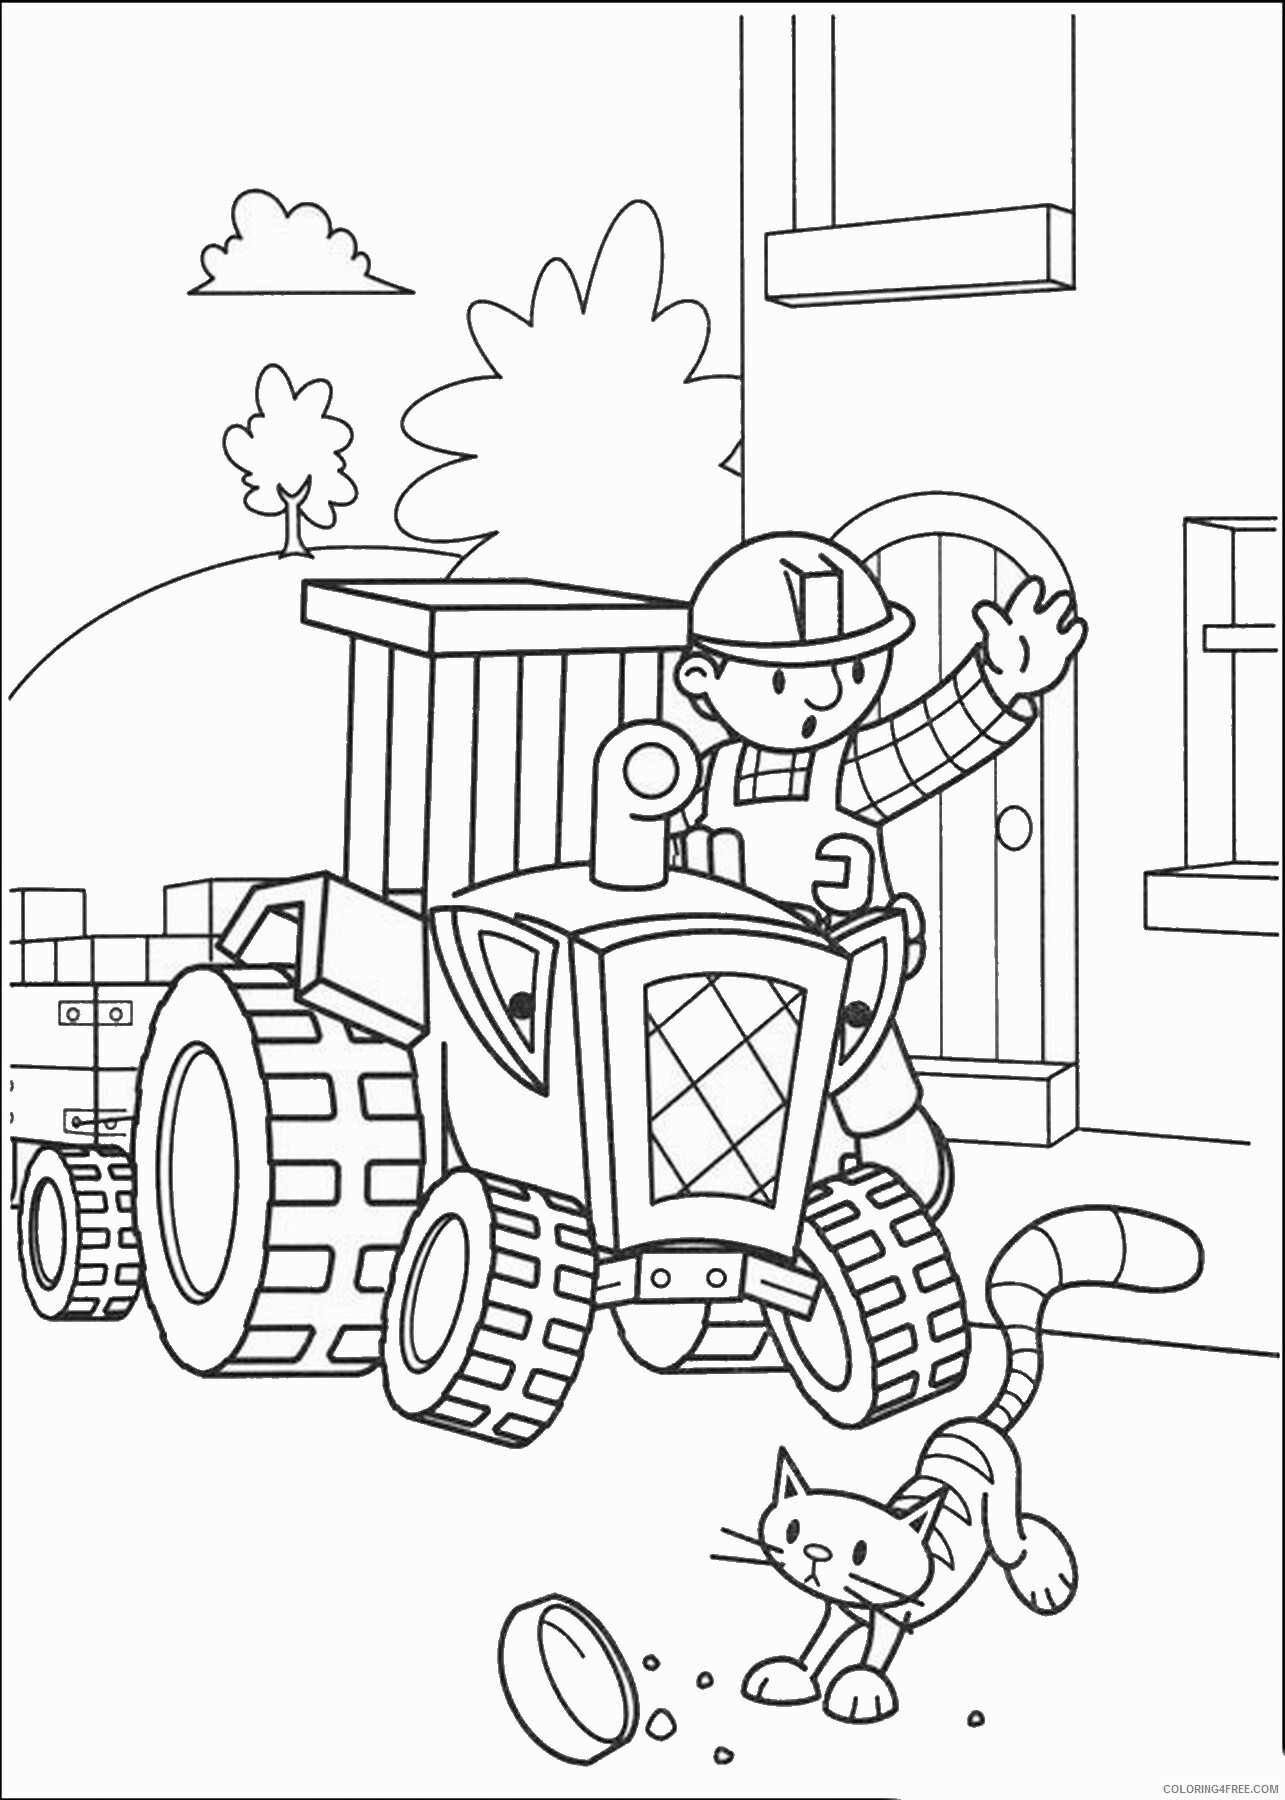 Bob the Builder Coloring Pages TV Film bob the builder_01 Printable 2020 00951 Coloring4free